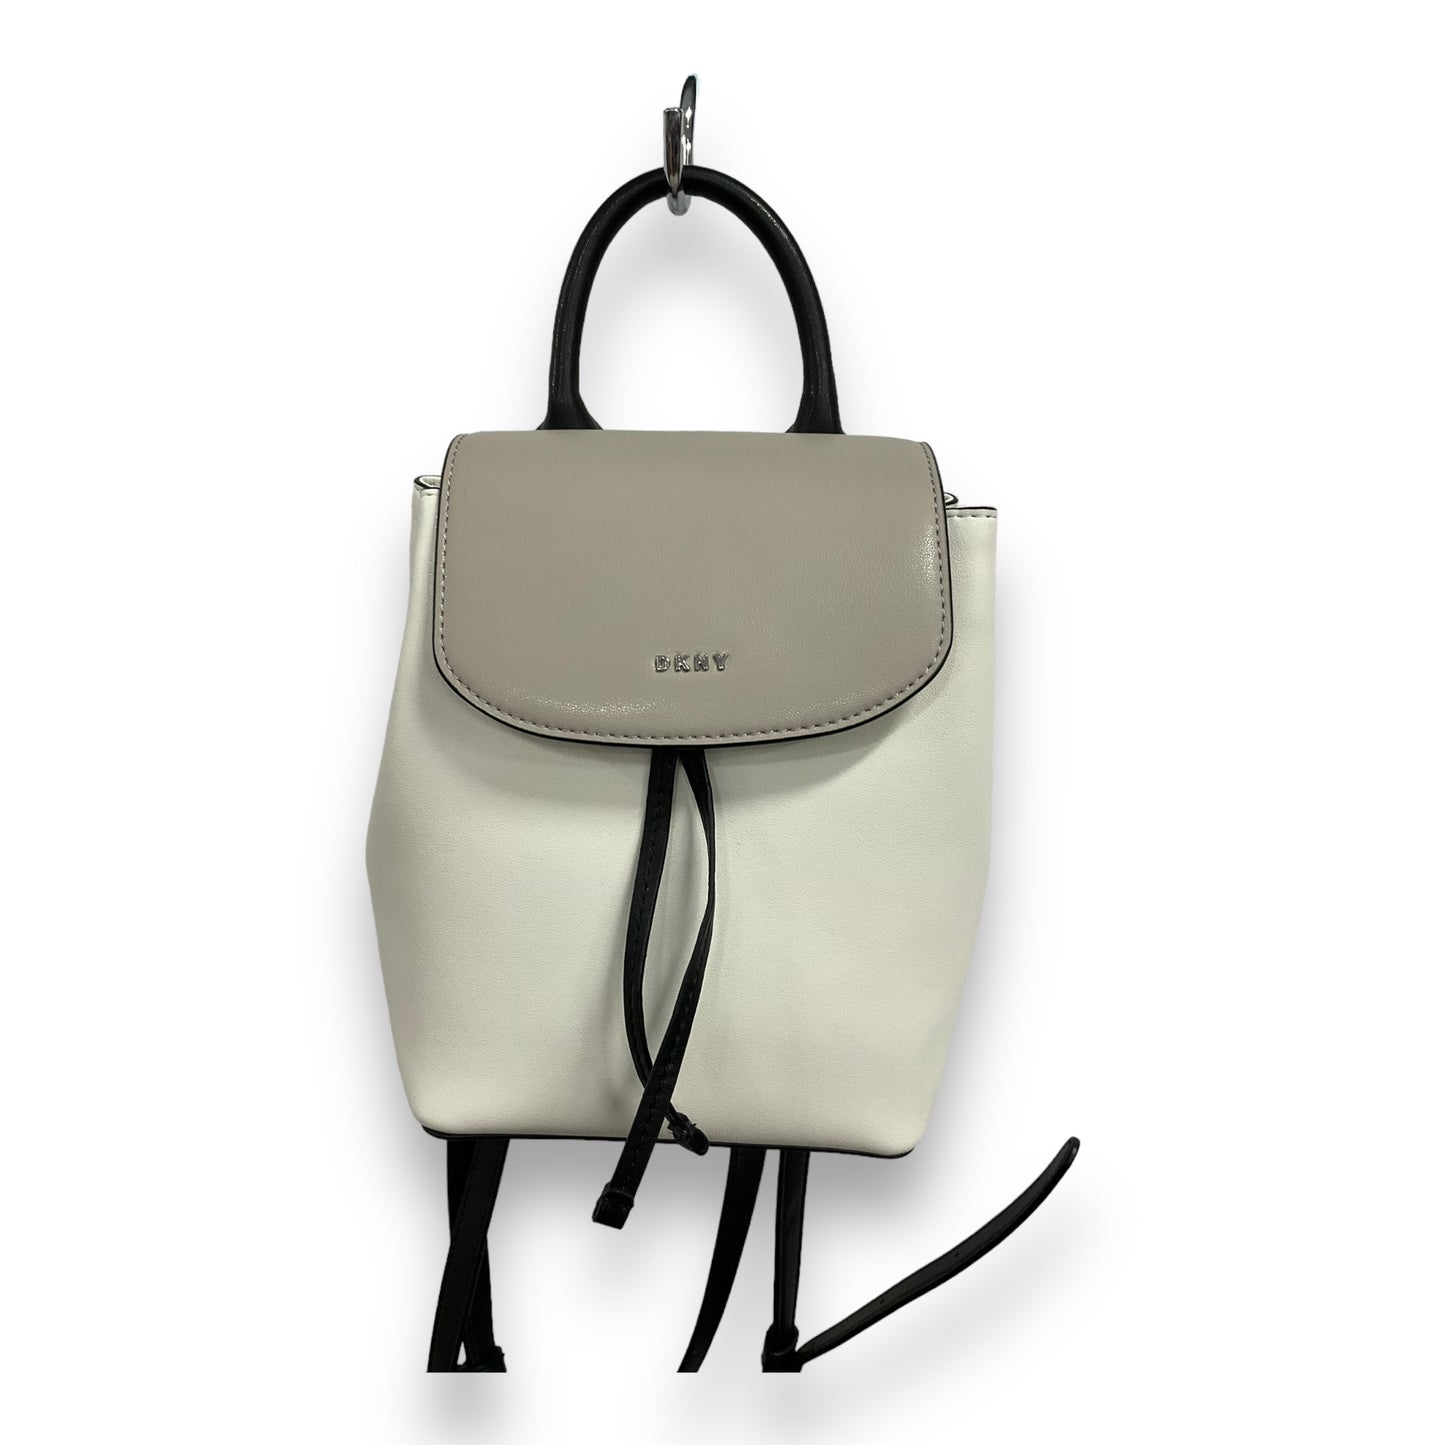 Backpack By Dkny  Size: Small